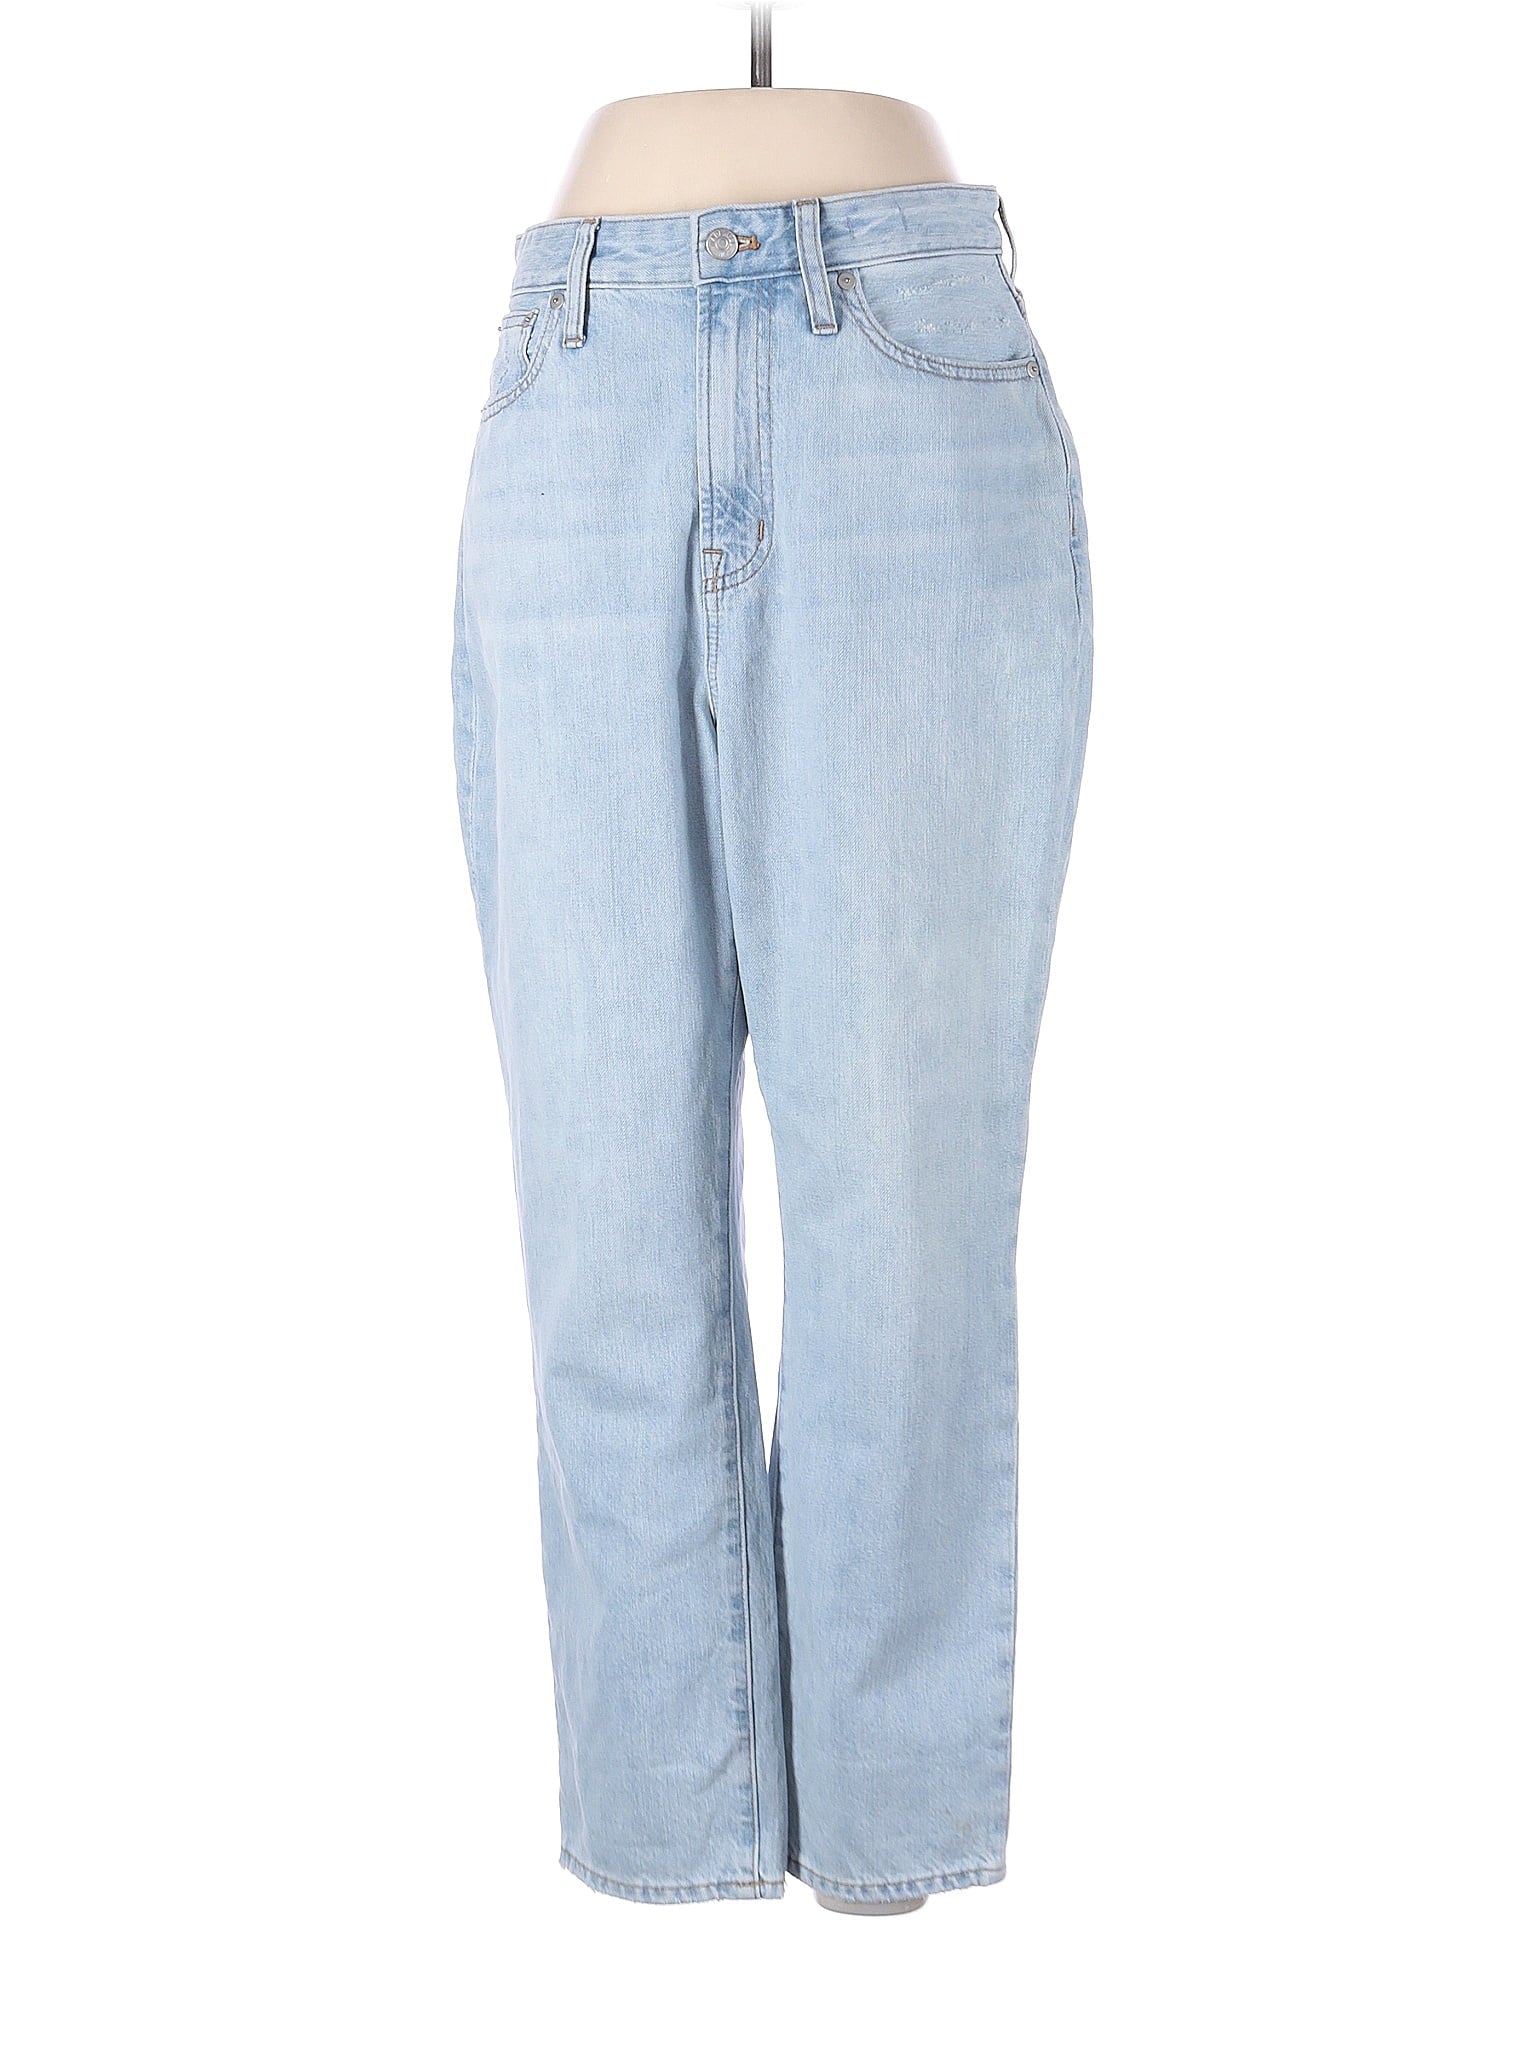 Mid-Rise Boyjeans Jeans in Light Wash waist size - 28 P